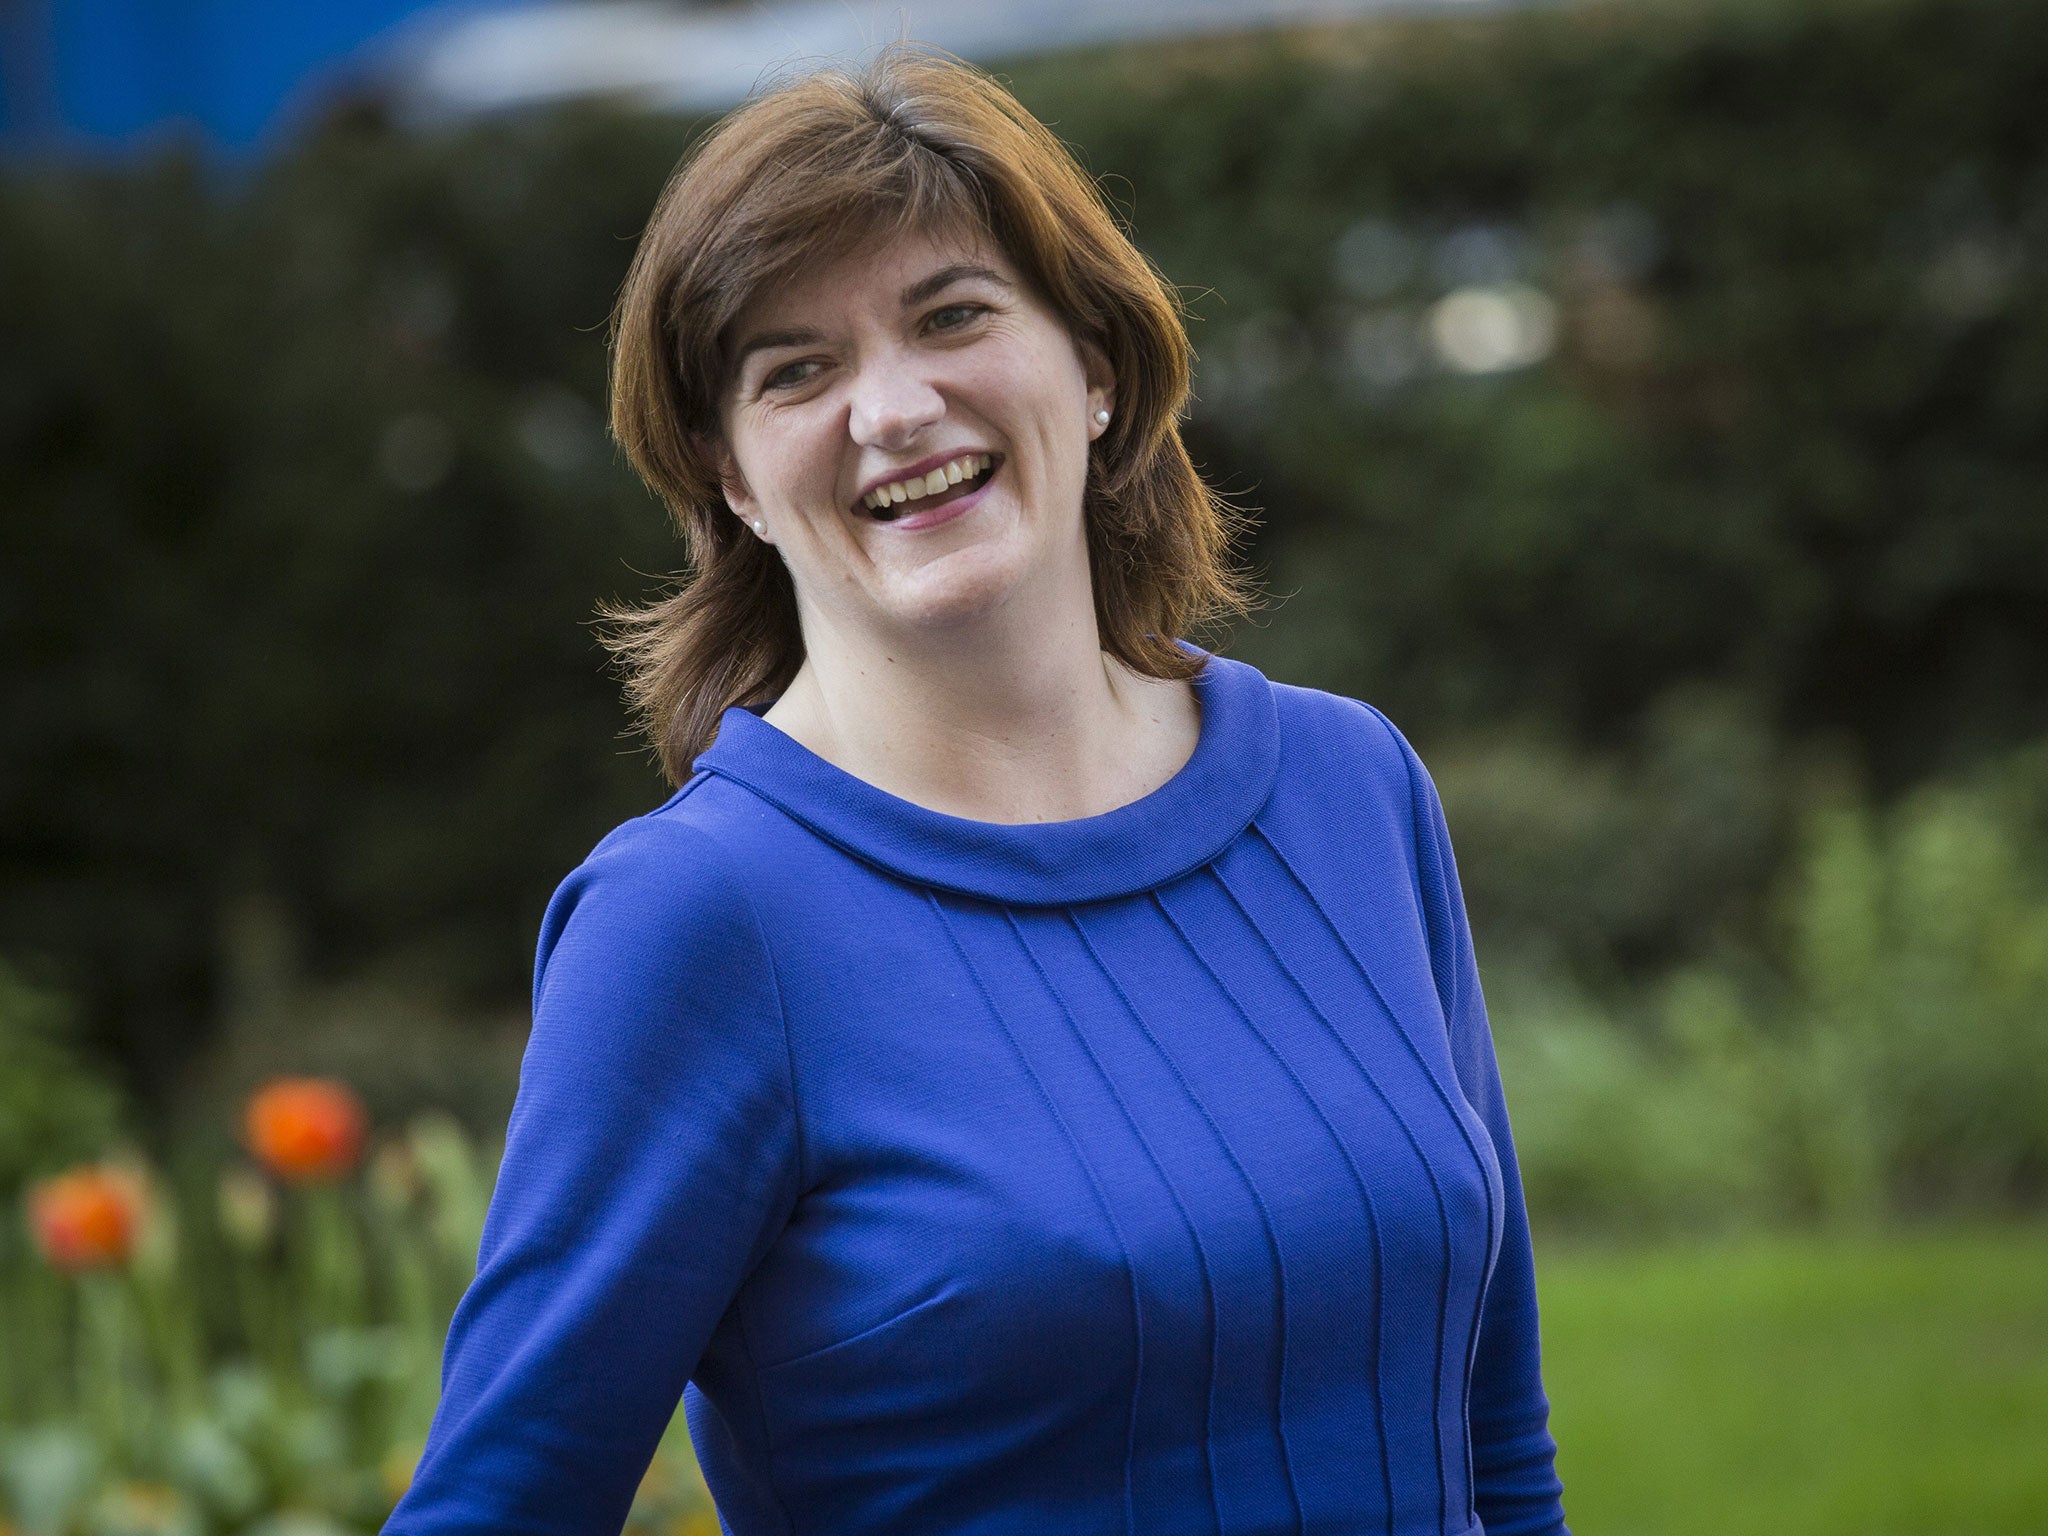 The Prime Minister’s announcement that Nicky Morgan has been promoted to the role of Education Secretary has been met with mixed reactions after it emerged she voted against legalising same-sex marriage.